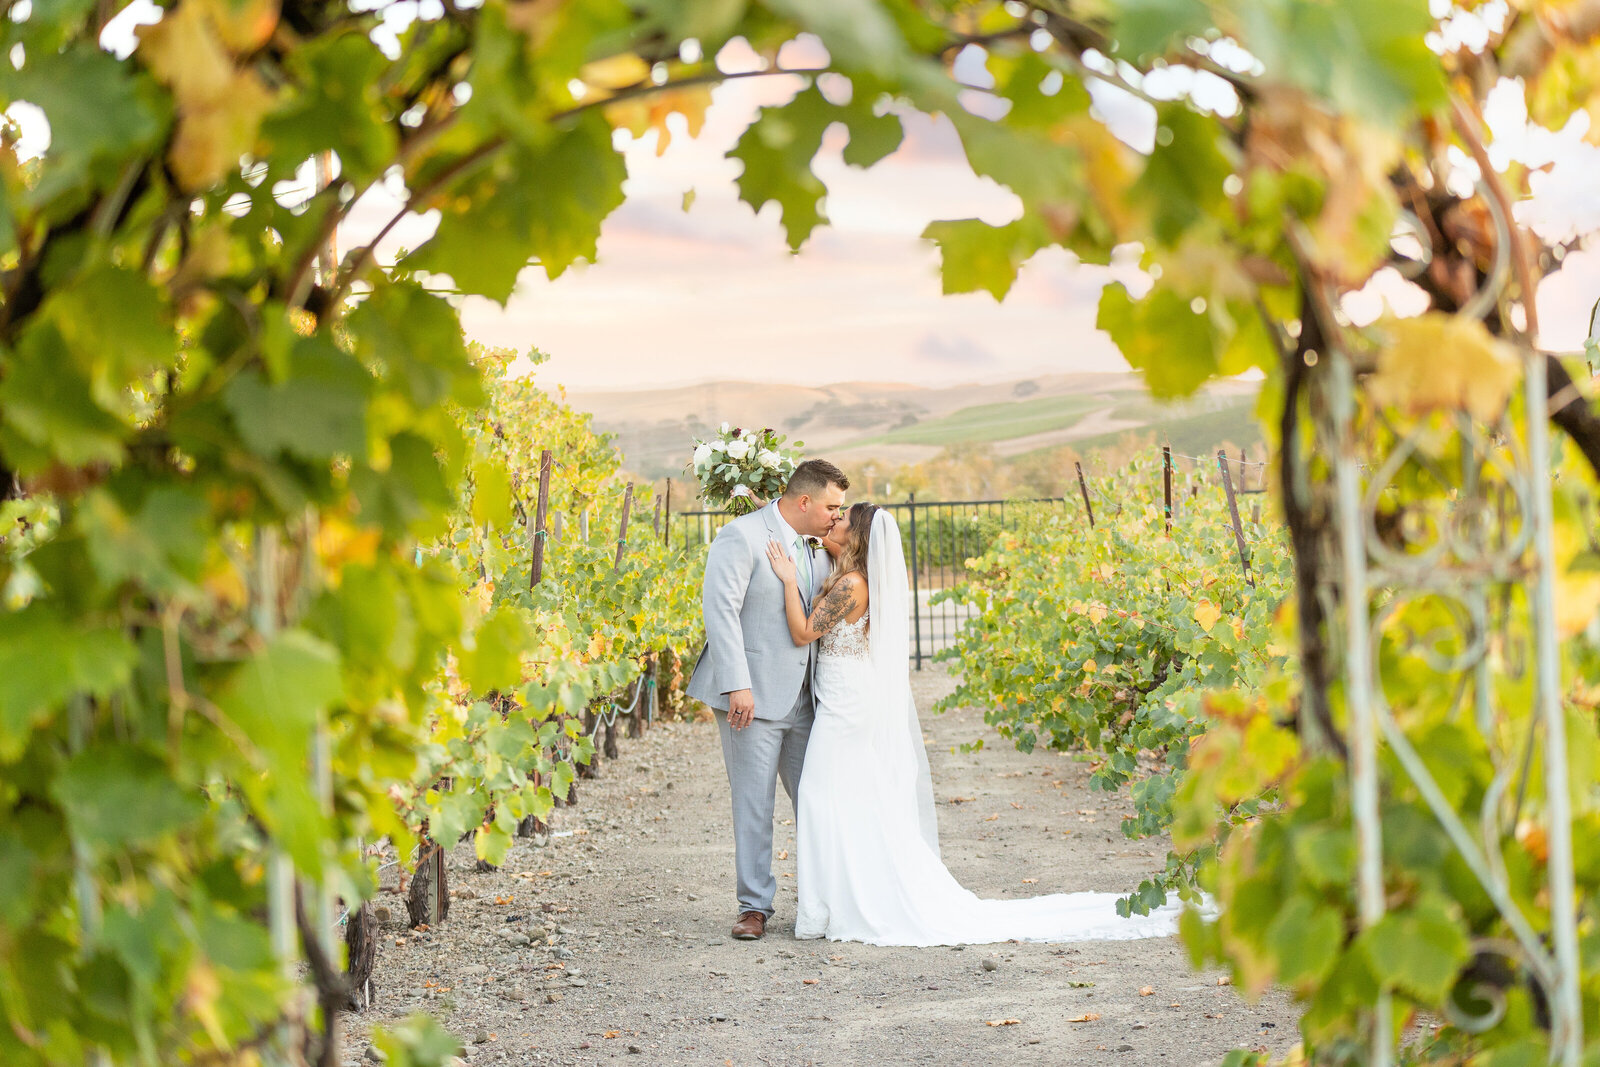 Bride and groom kiss in the middle of a vineyard with a leaf arch in the foreground, photo by wedding photographer sacramento, ca, philippe studio pro.